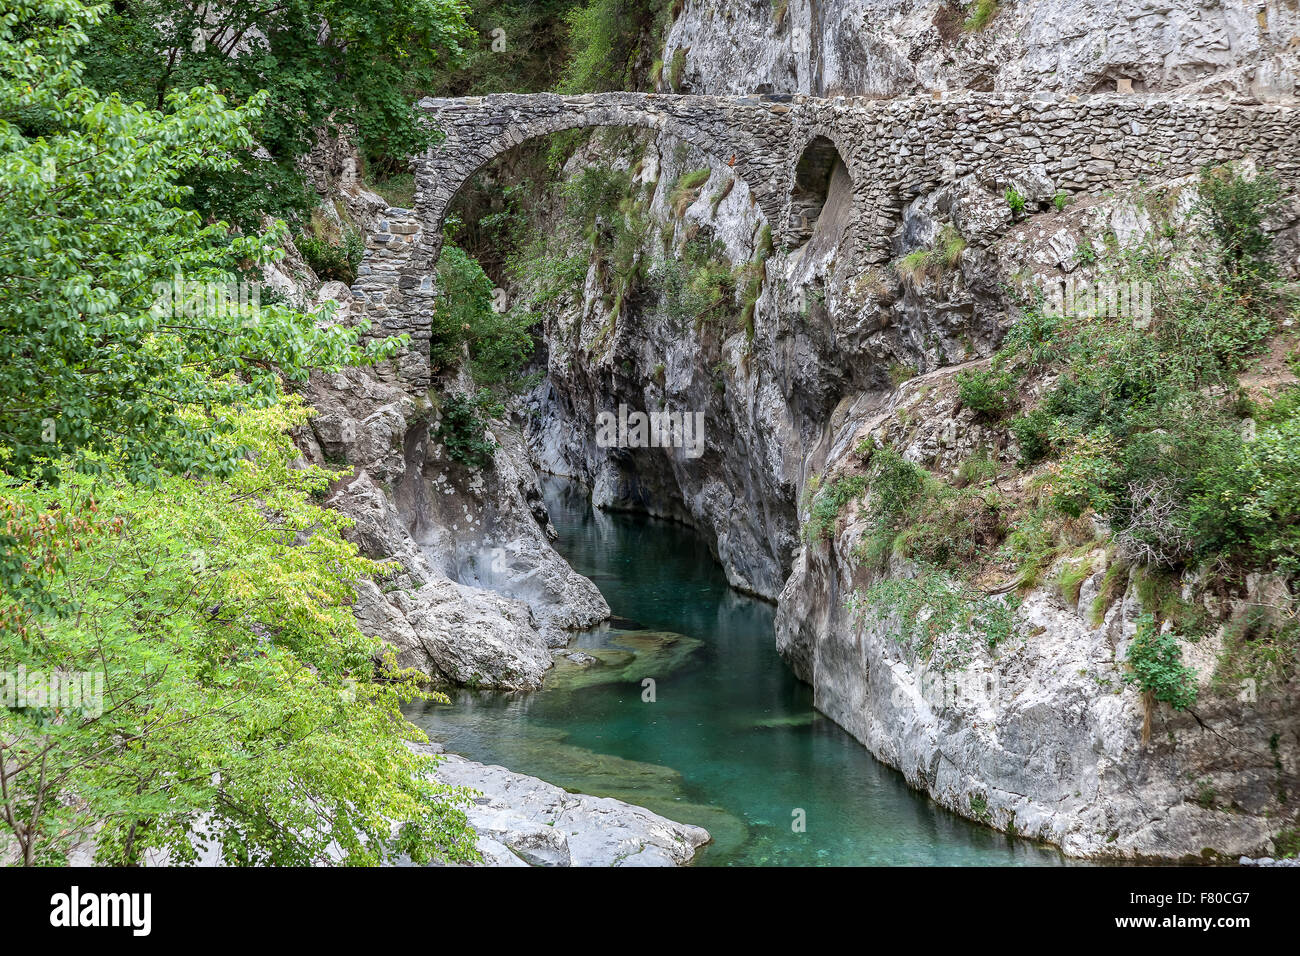 The old bridge at Saorge. Saorge is a very beautiful medieval town in Alpes-Maritimes department in southeastern France. Stock Photo